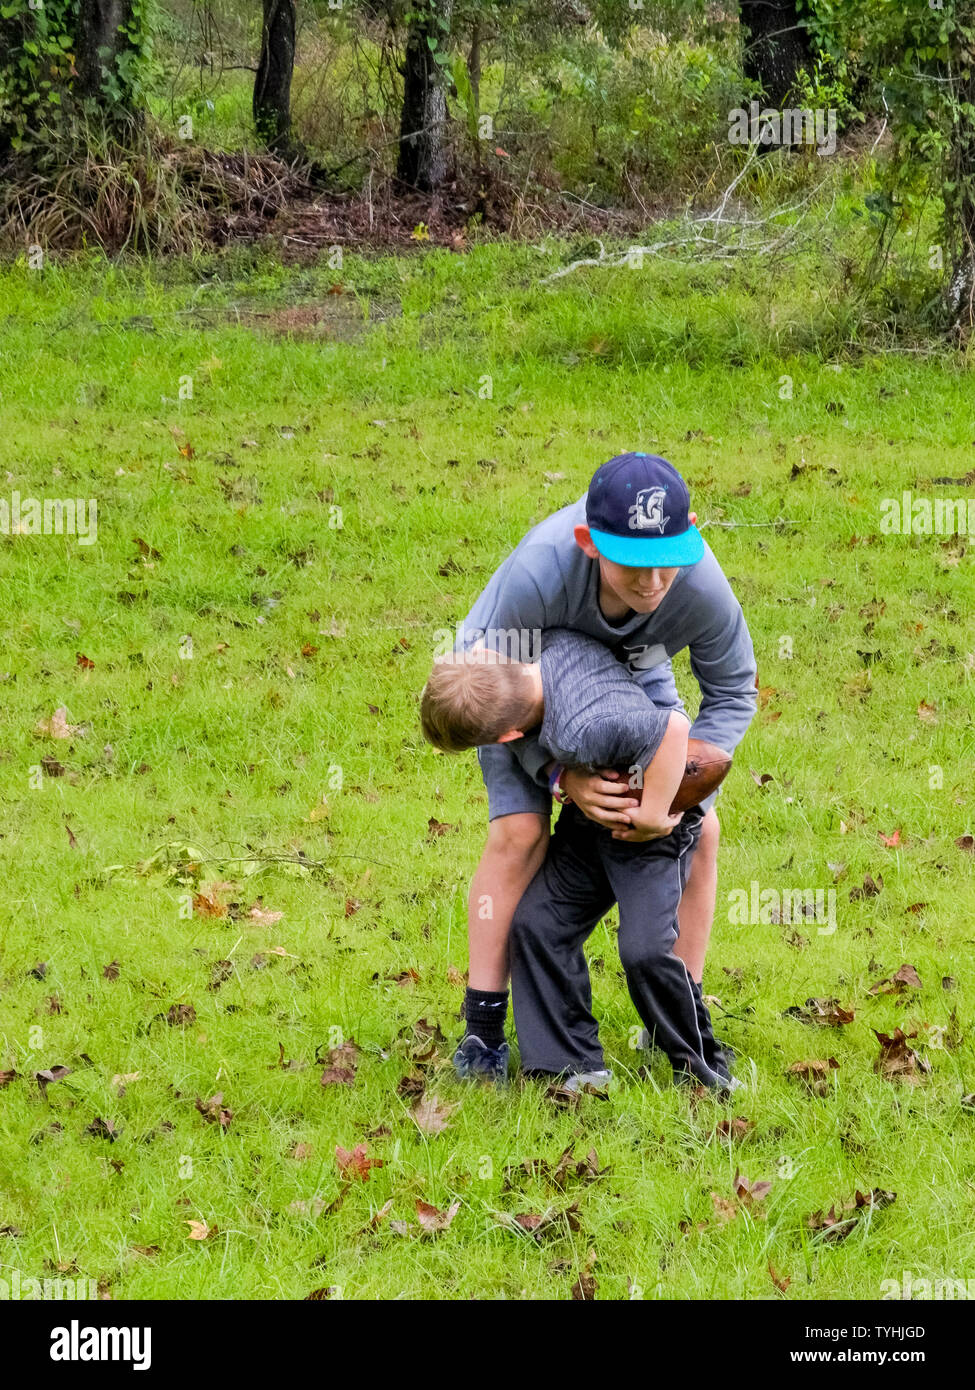 Two young American brothers have fun playing with a football in the grassy backyard of their rural home on an overcast autumn day in Louisiana, USA. Stock Photo